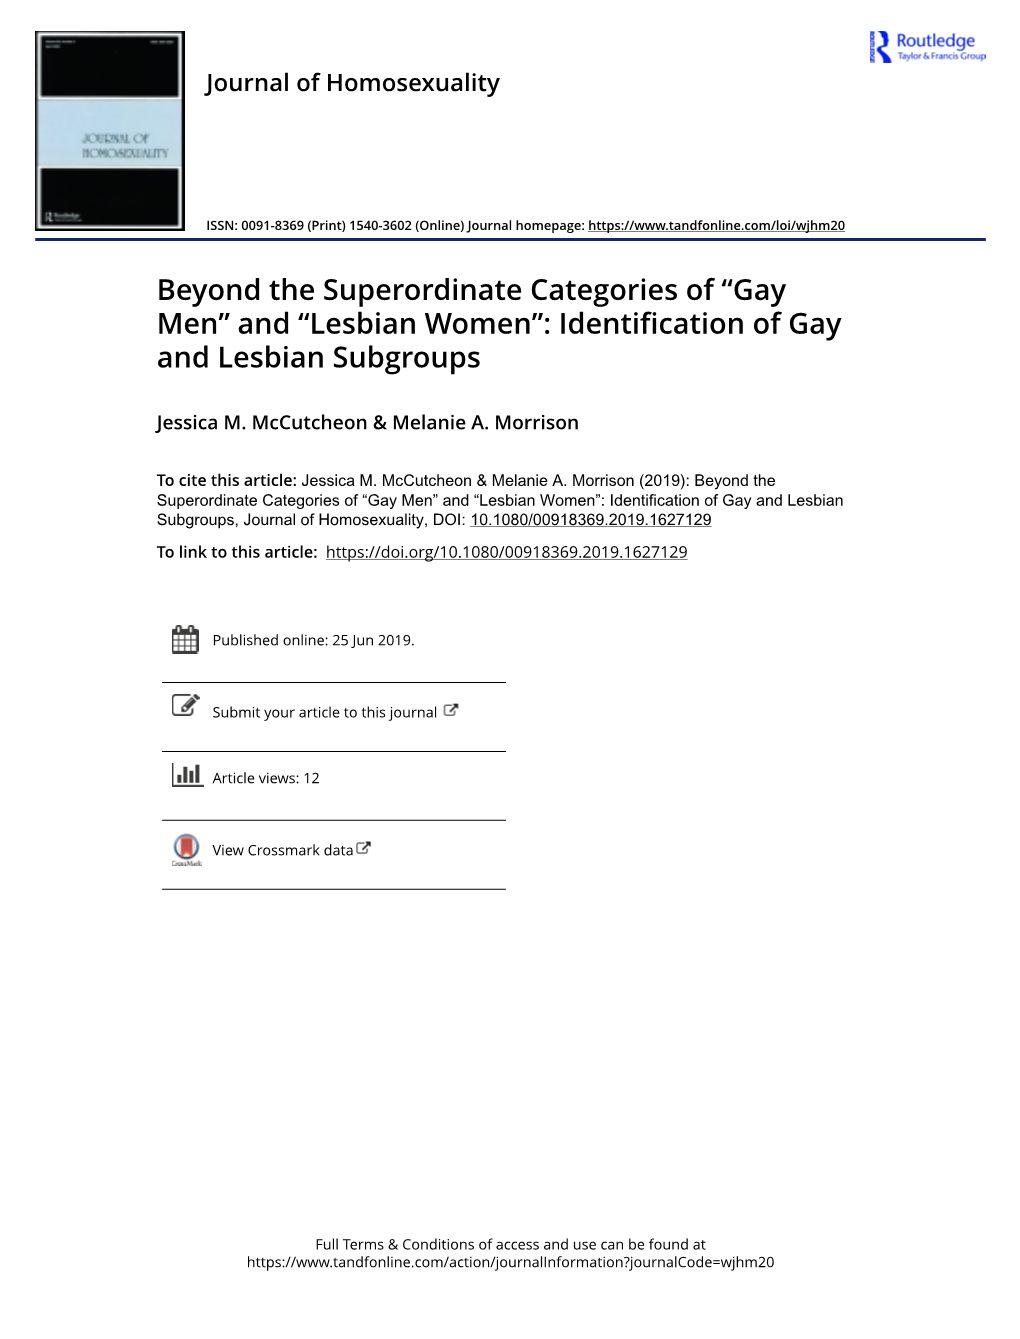 Gay Men” and “Lesbian Women”: Identification of Gay and Lesbian Subgroups